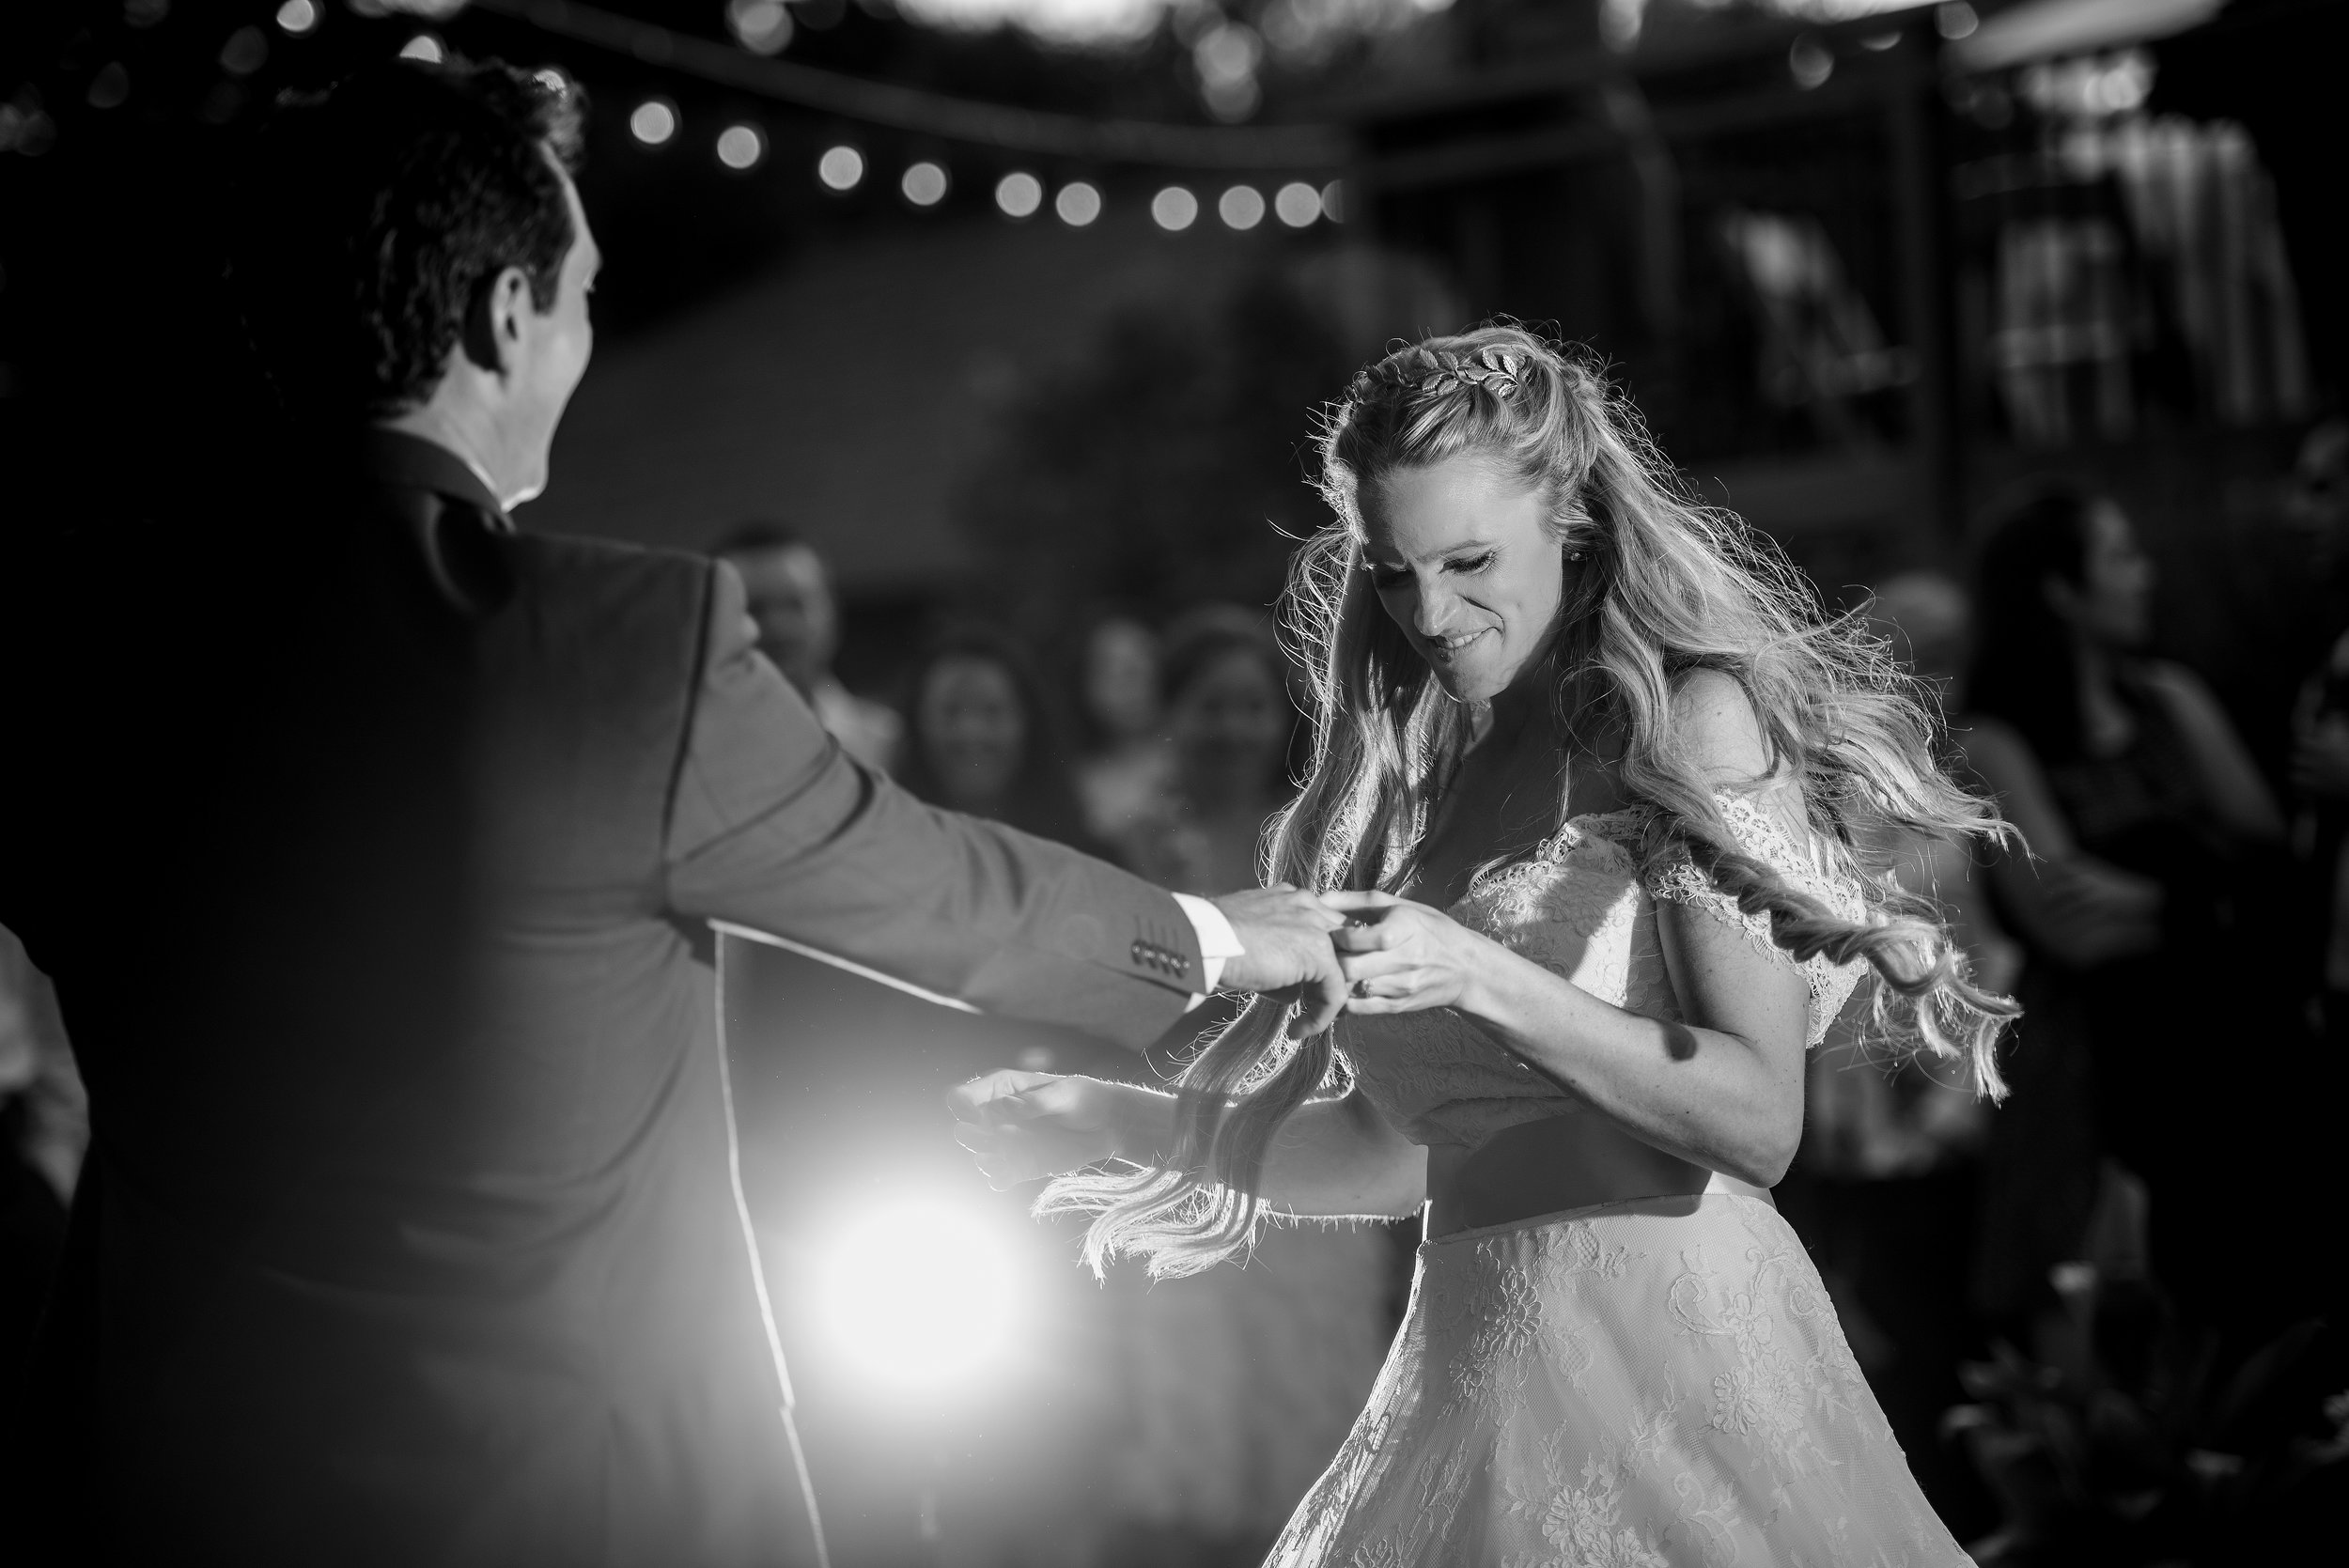  Bride and grooms first dance during backyard wedding reception in Sonoma California.&nbsp; 